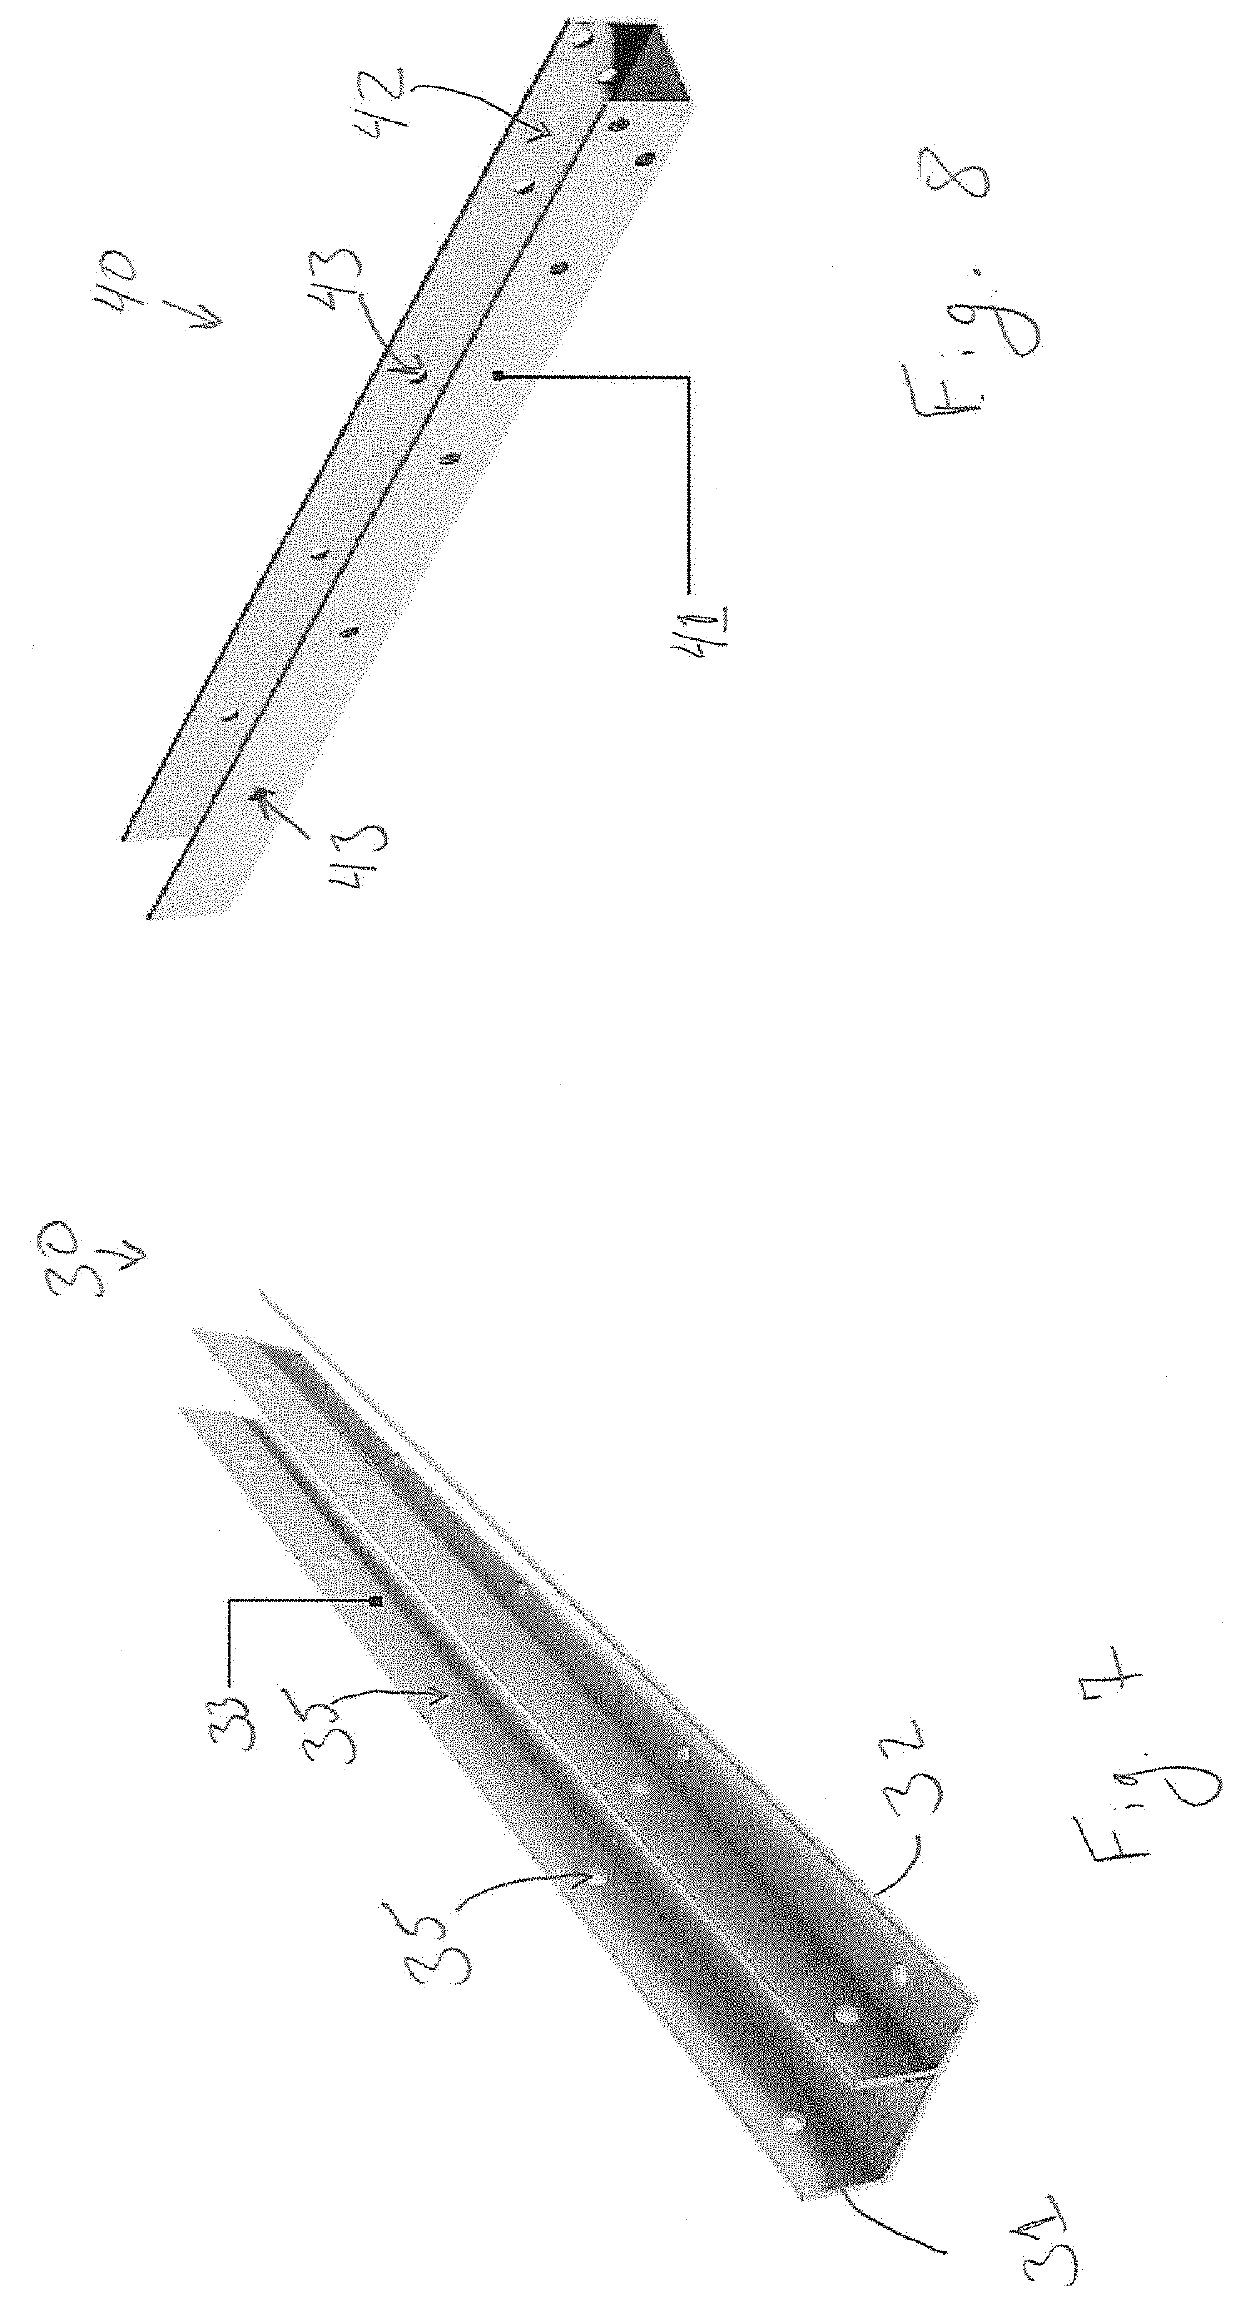 Multi-purpose structural panels and systems for assembling structures